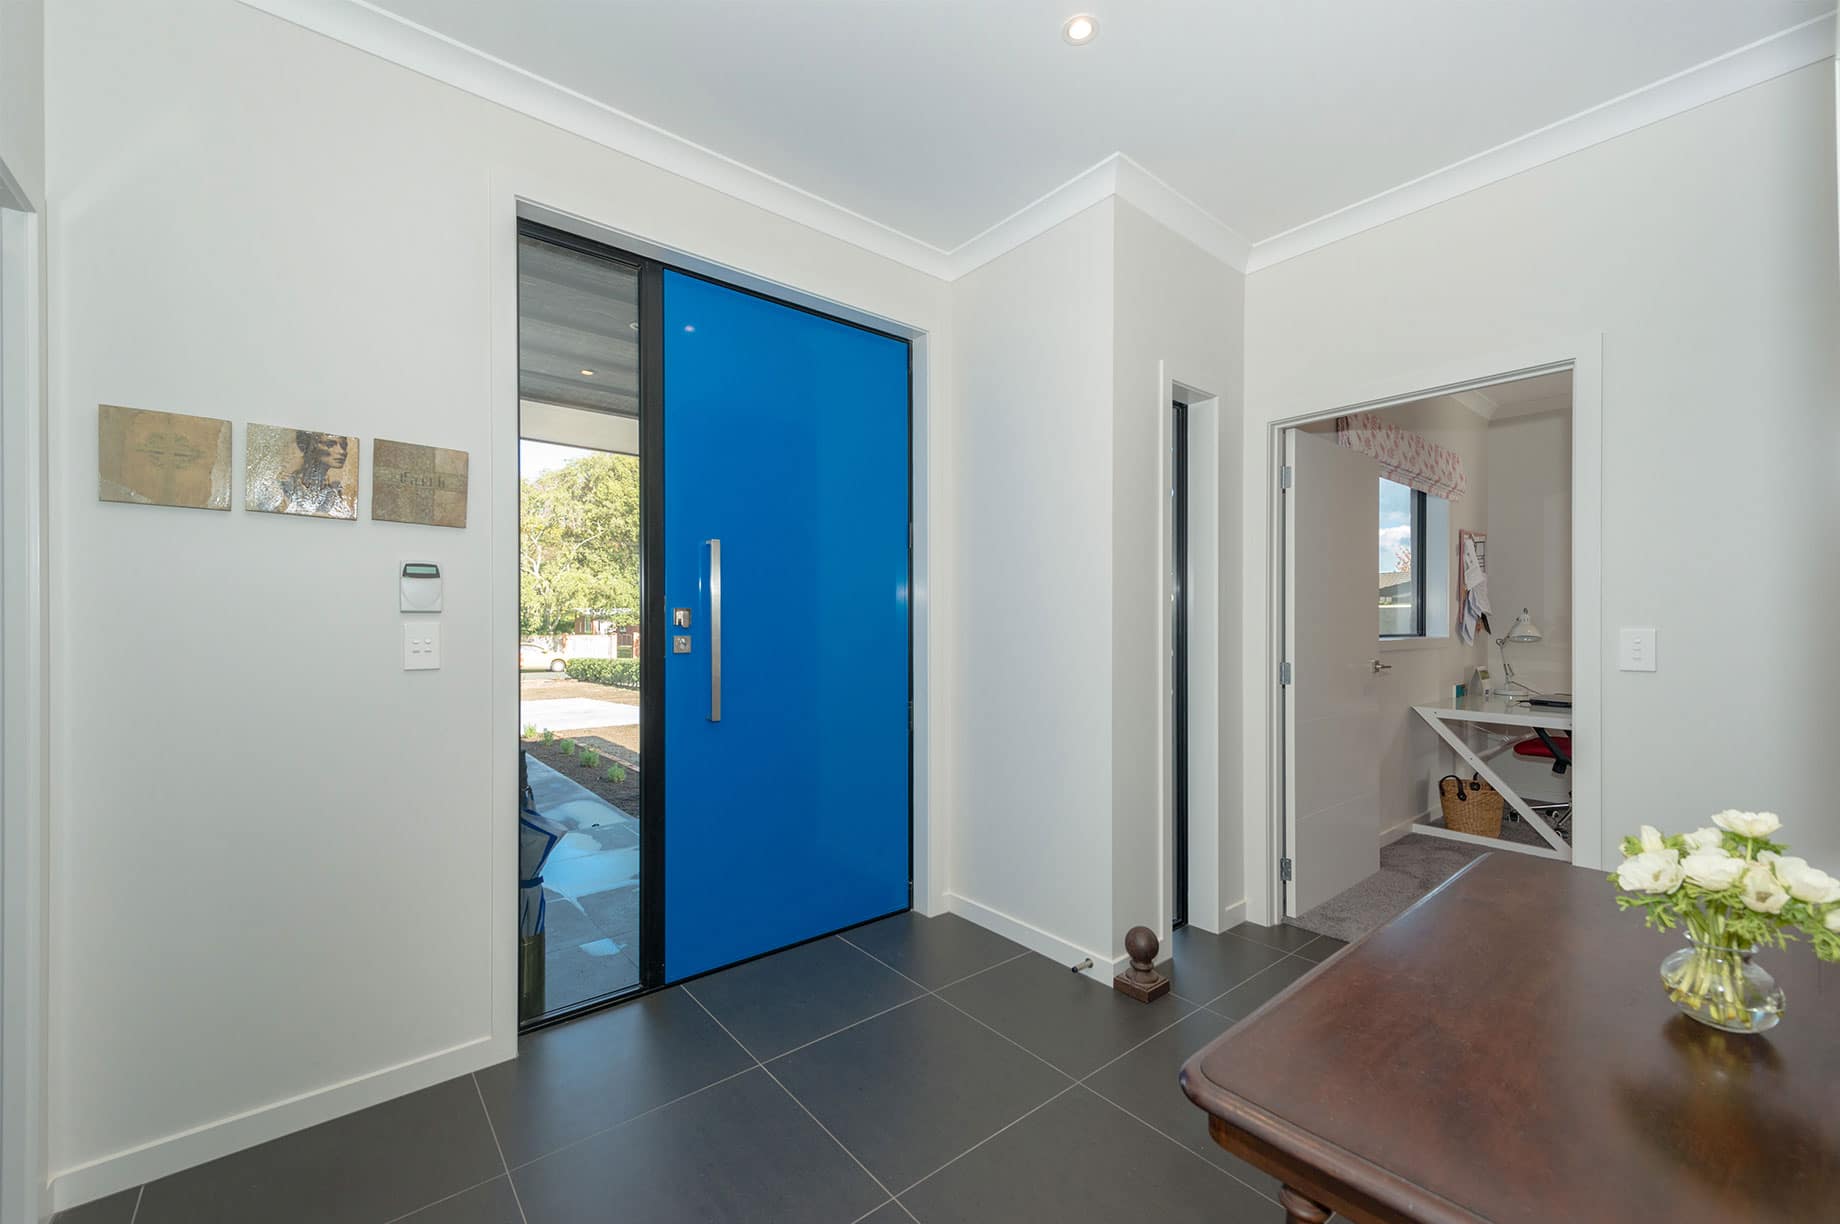 House entry with blue door interior